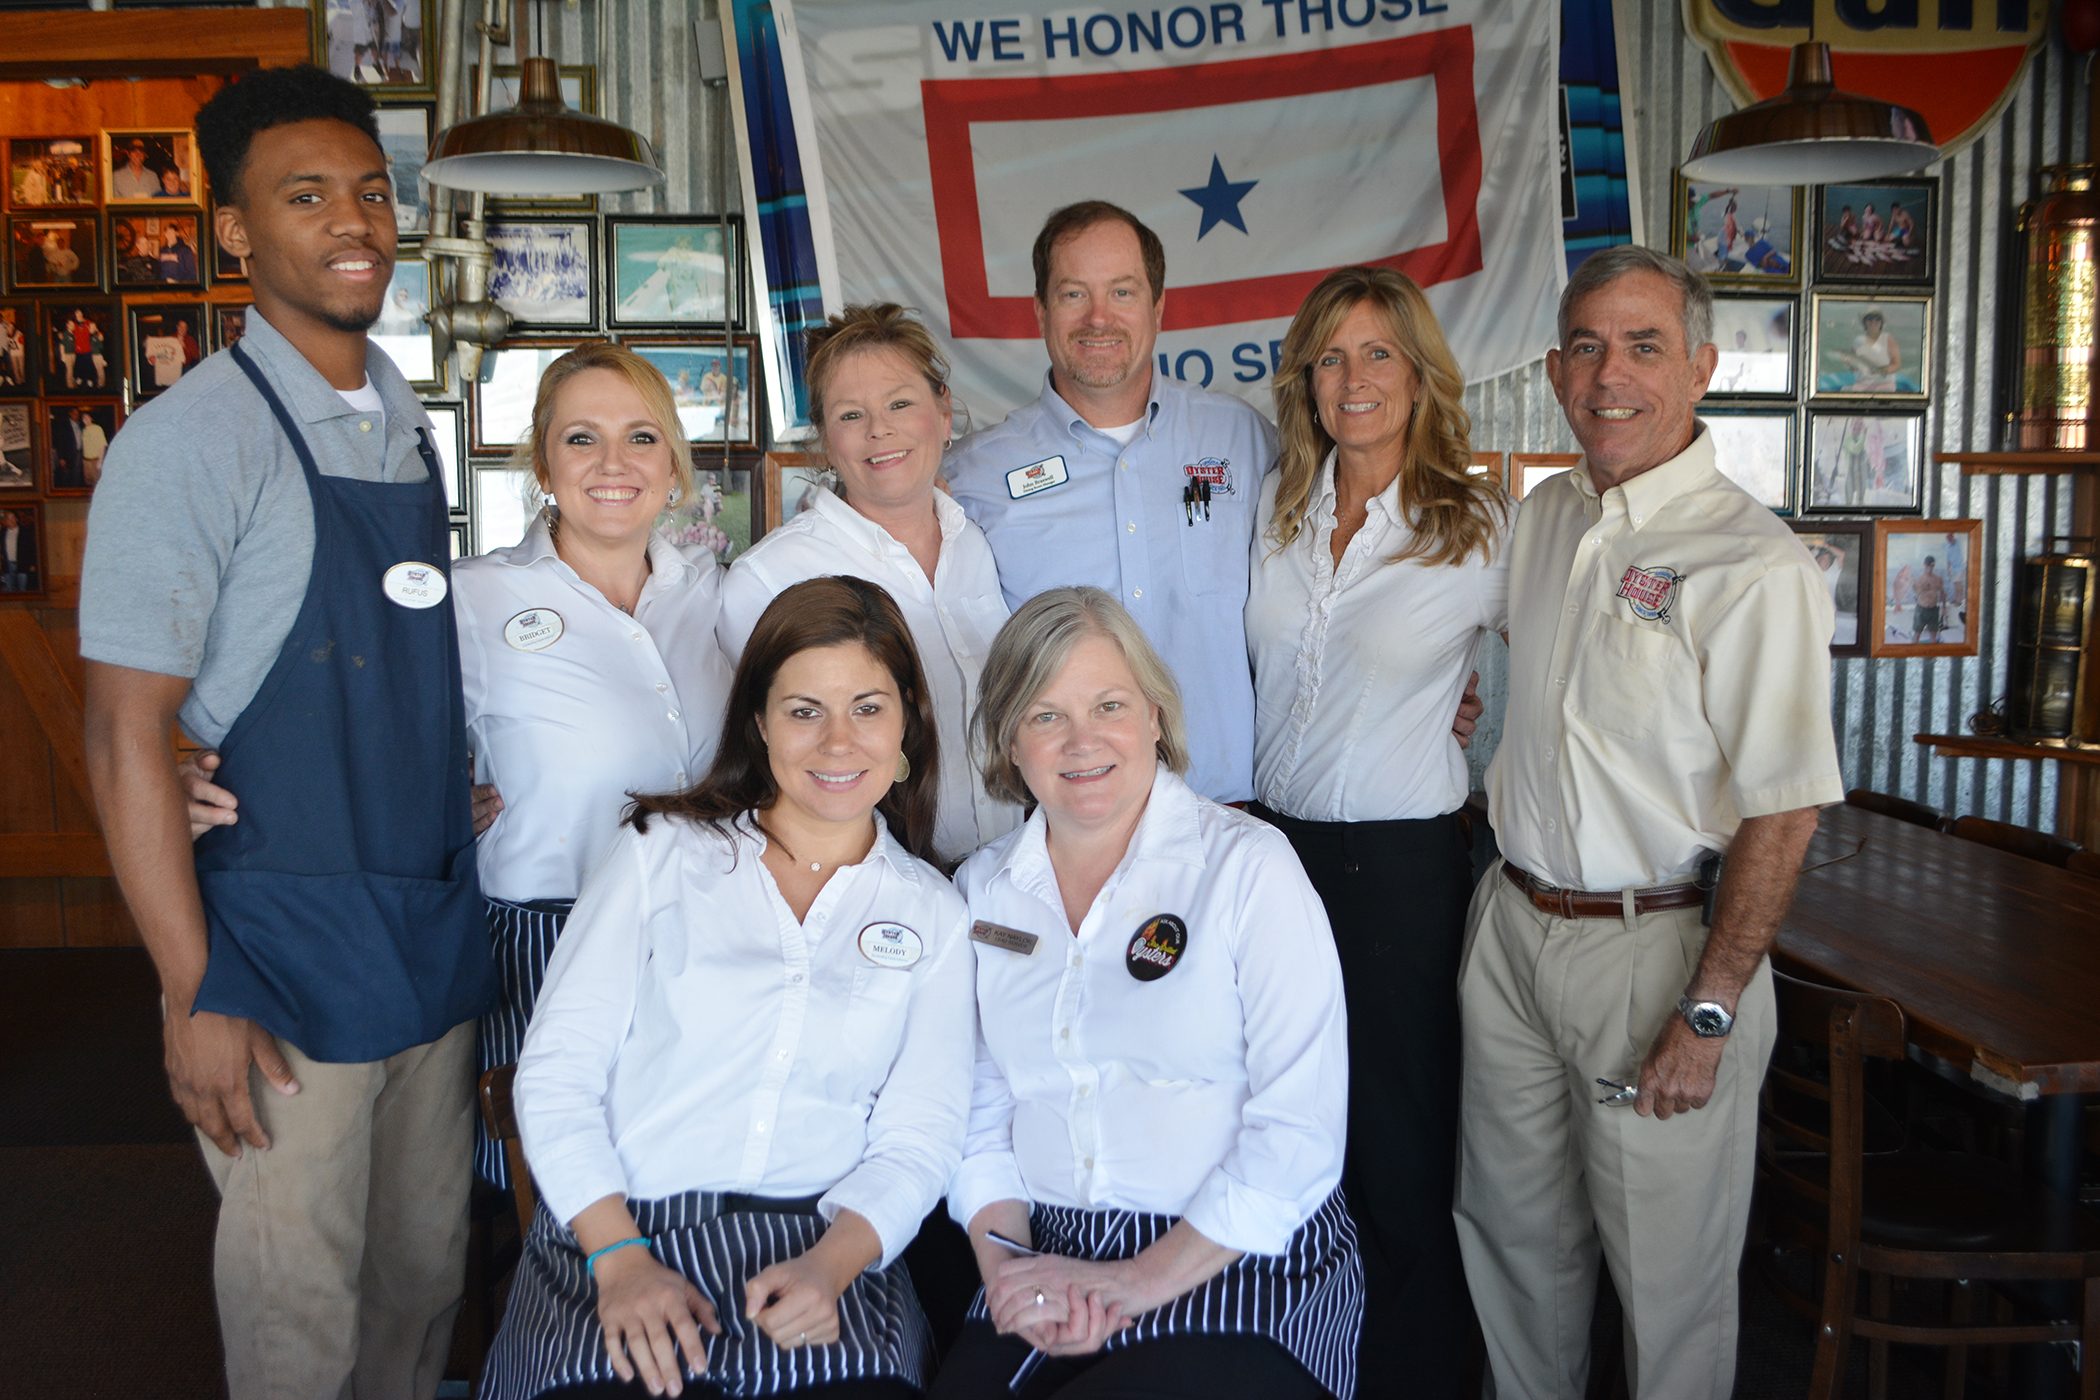 Rufus Young, Bridgette Knaebel, Tracy Tureau, John Braswell, Karen Taubel and David Dekle, co-owner of the Original Oyster House; from left sitting are Melody Tart and Kay Naylor.